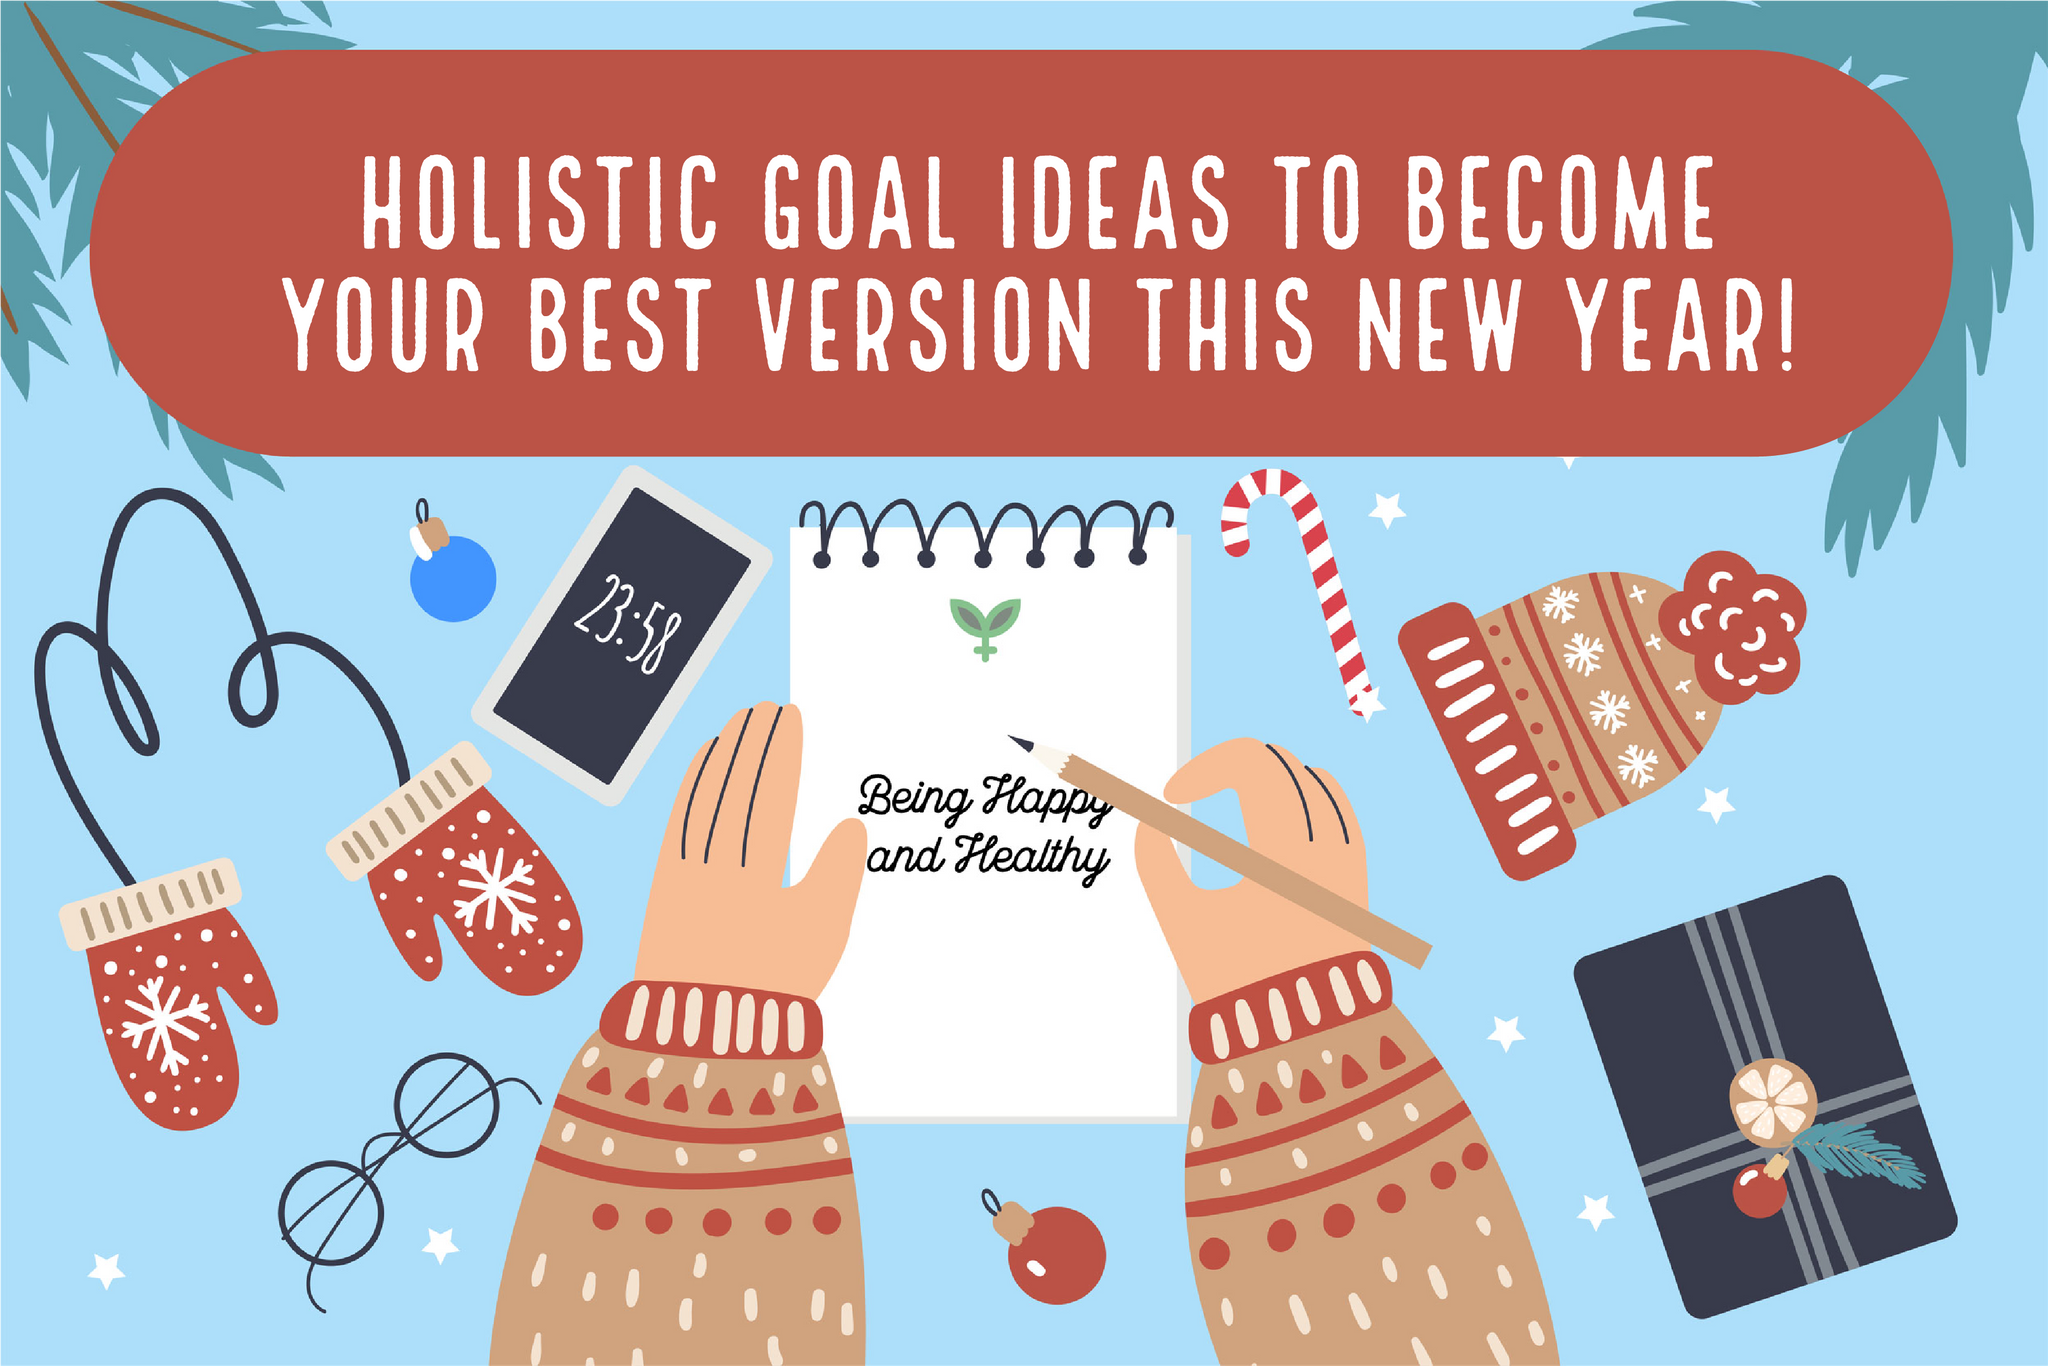 Holistic Goal Ideas to Become Your Best Version This New Year!